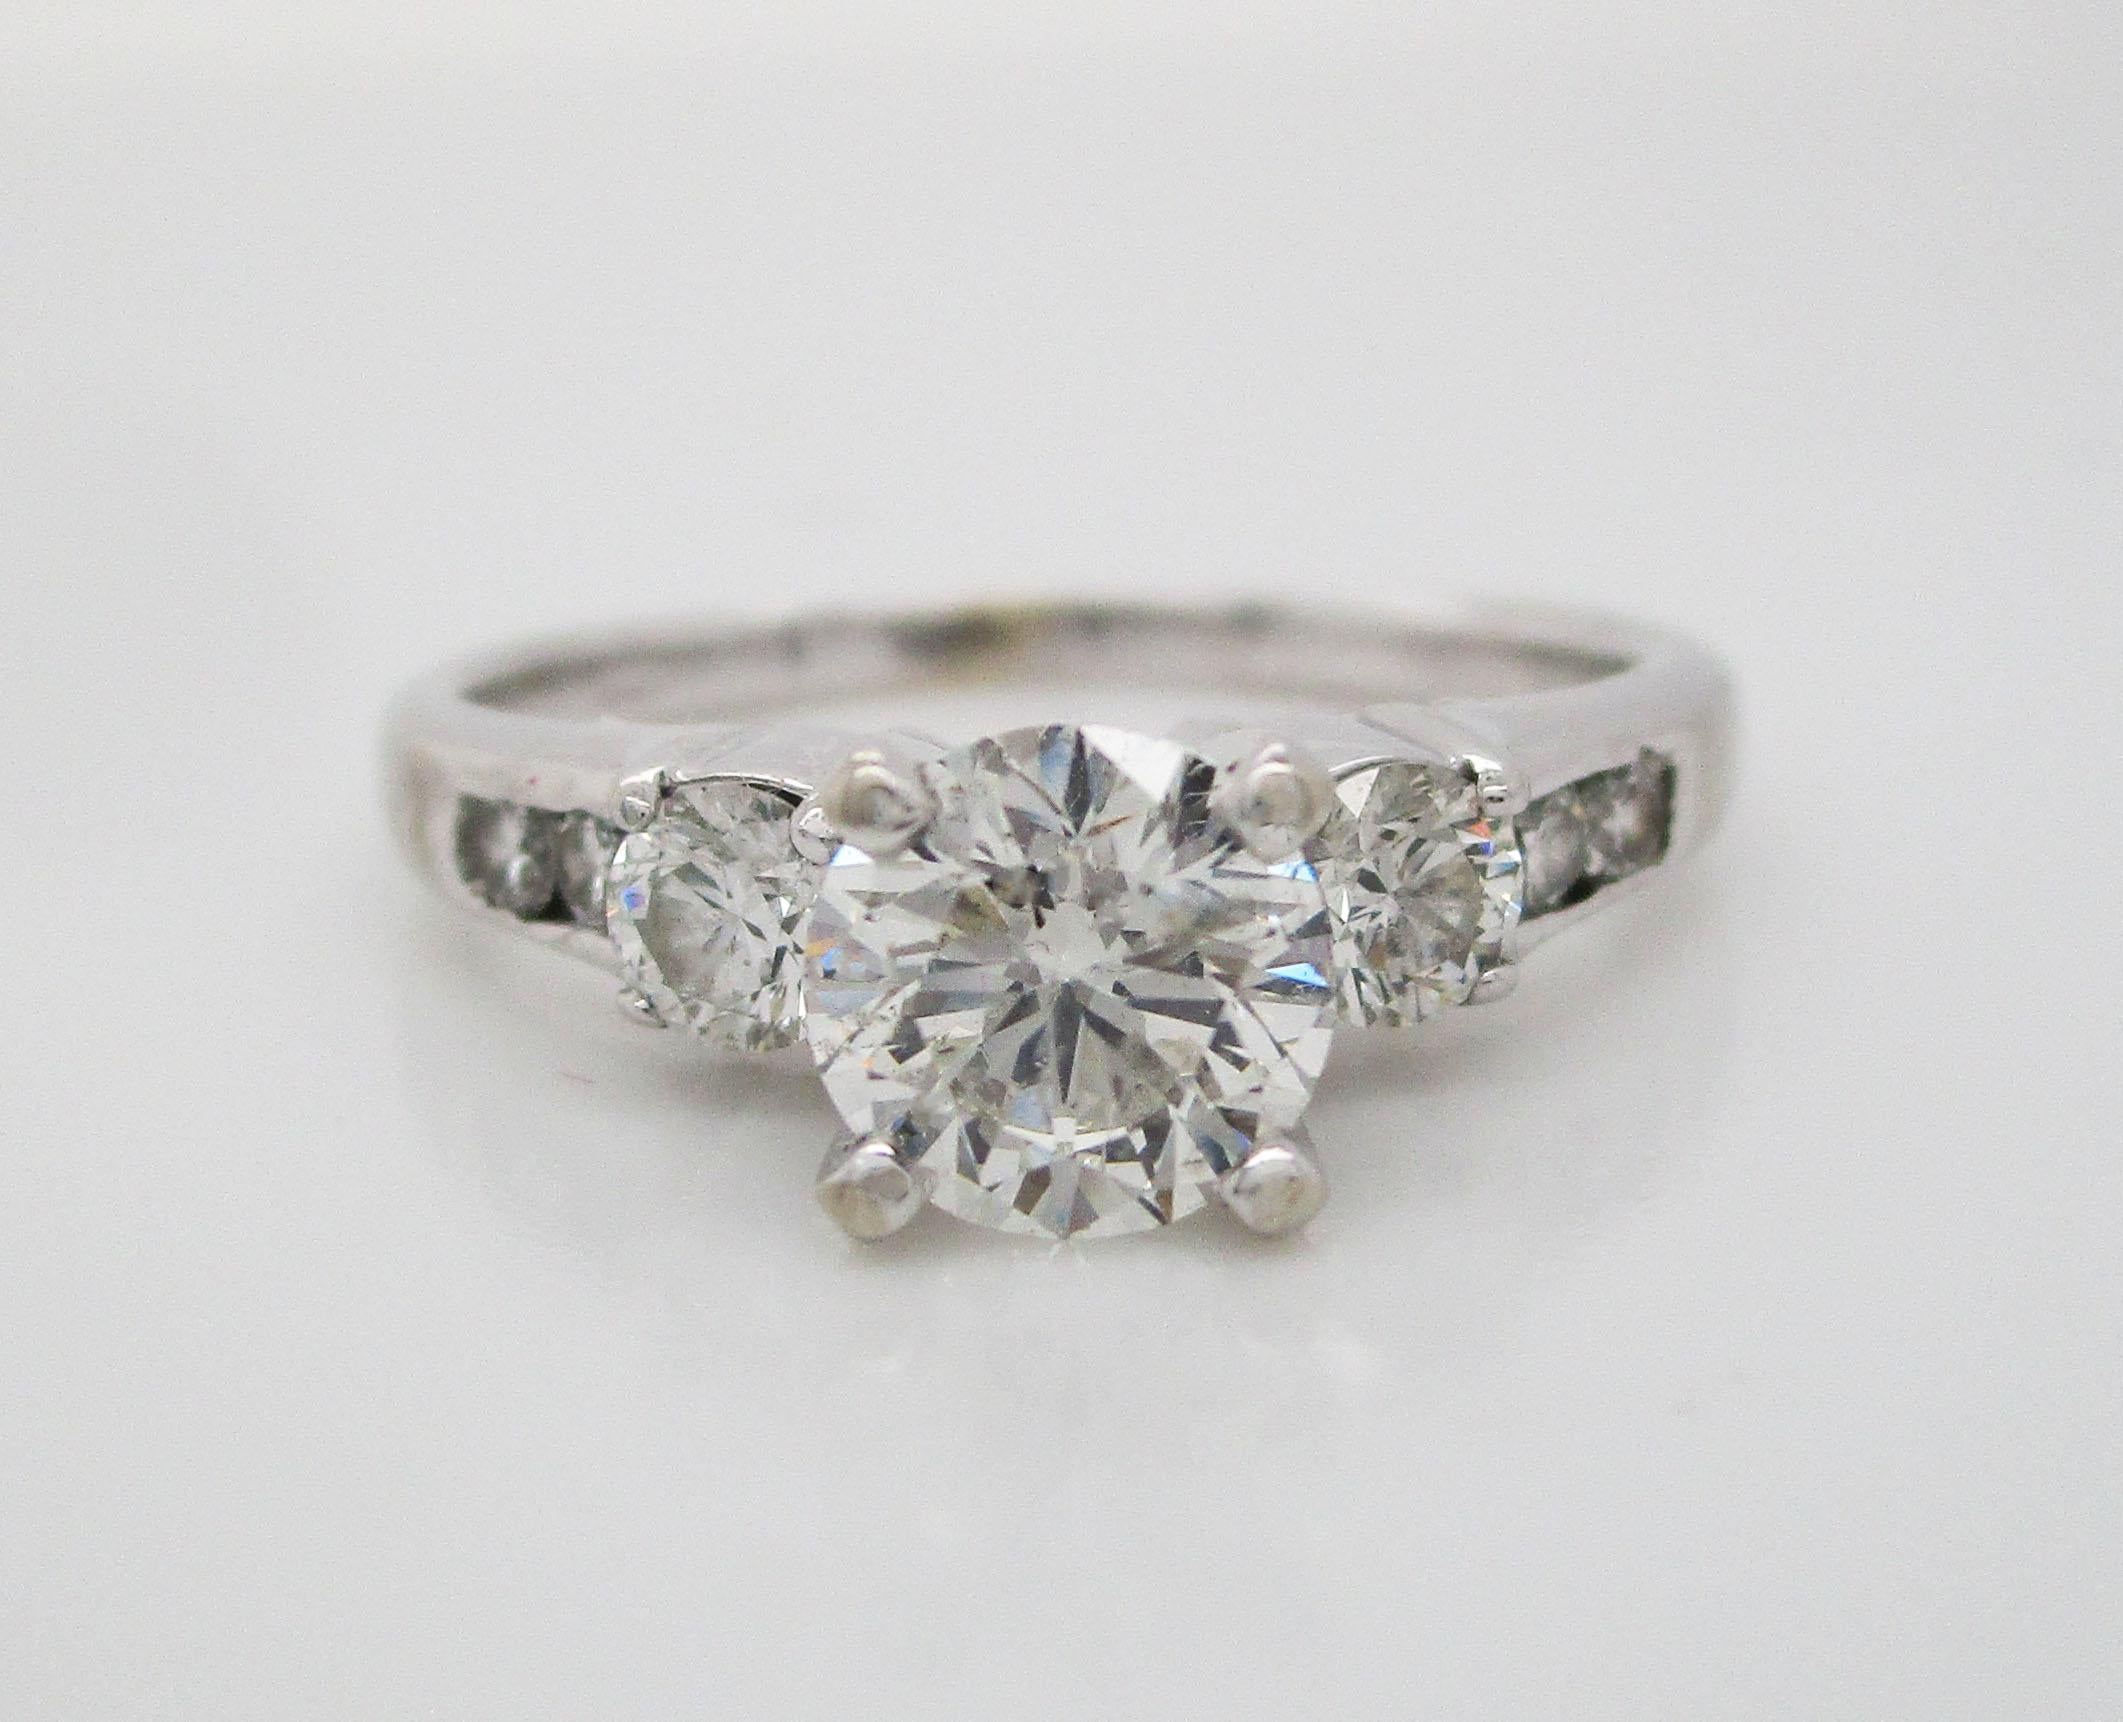 This stunning engagement ring is in 14k white gold and boasts a certified 0.78 carat diamond center! The diamond center is accented by three diamonds on each side, creating a gorgeous, glittering ring! This is the perfect ring for the woman who